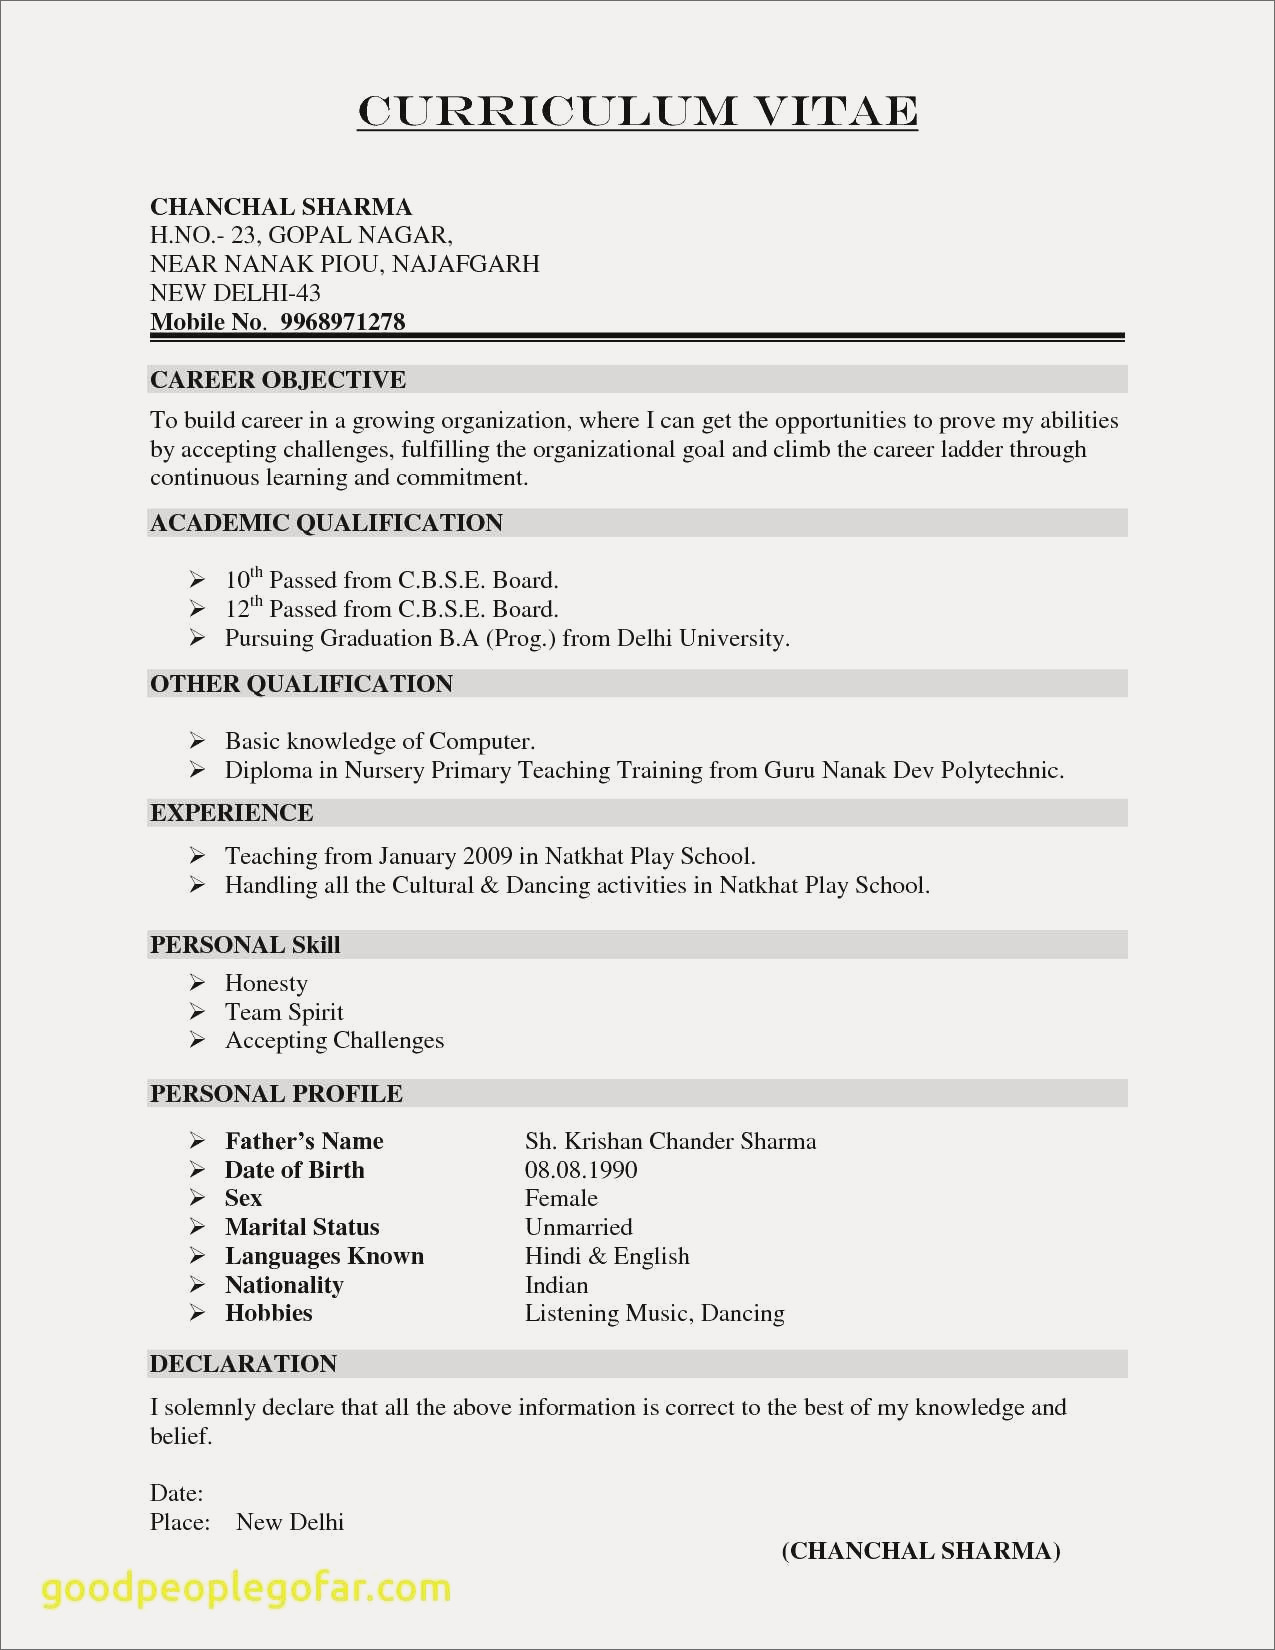 Simple Resume Template Simple Resume Examples For Teachers Best Of Image Cv Resume Example Doc Valid Resume Template Doc New Resume Doc 0d Of Simple Resume Examples For Teachers simple resume template|wikiresume.com